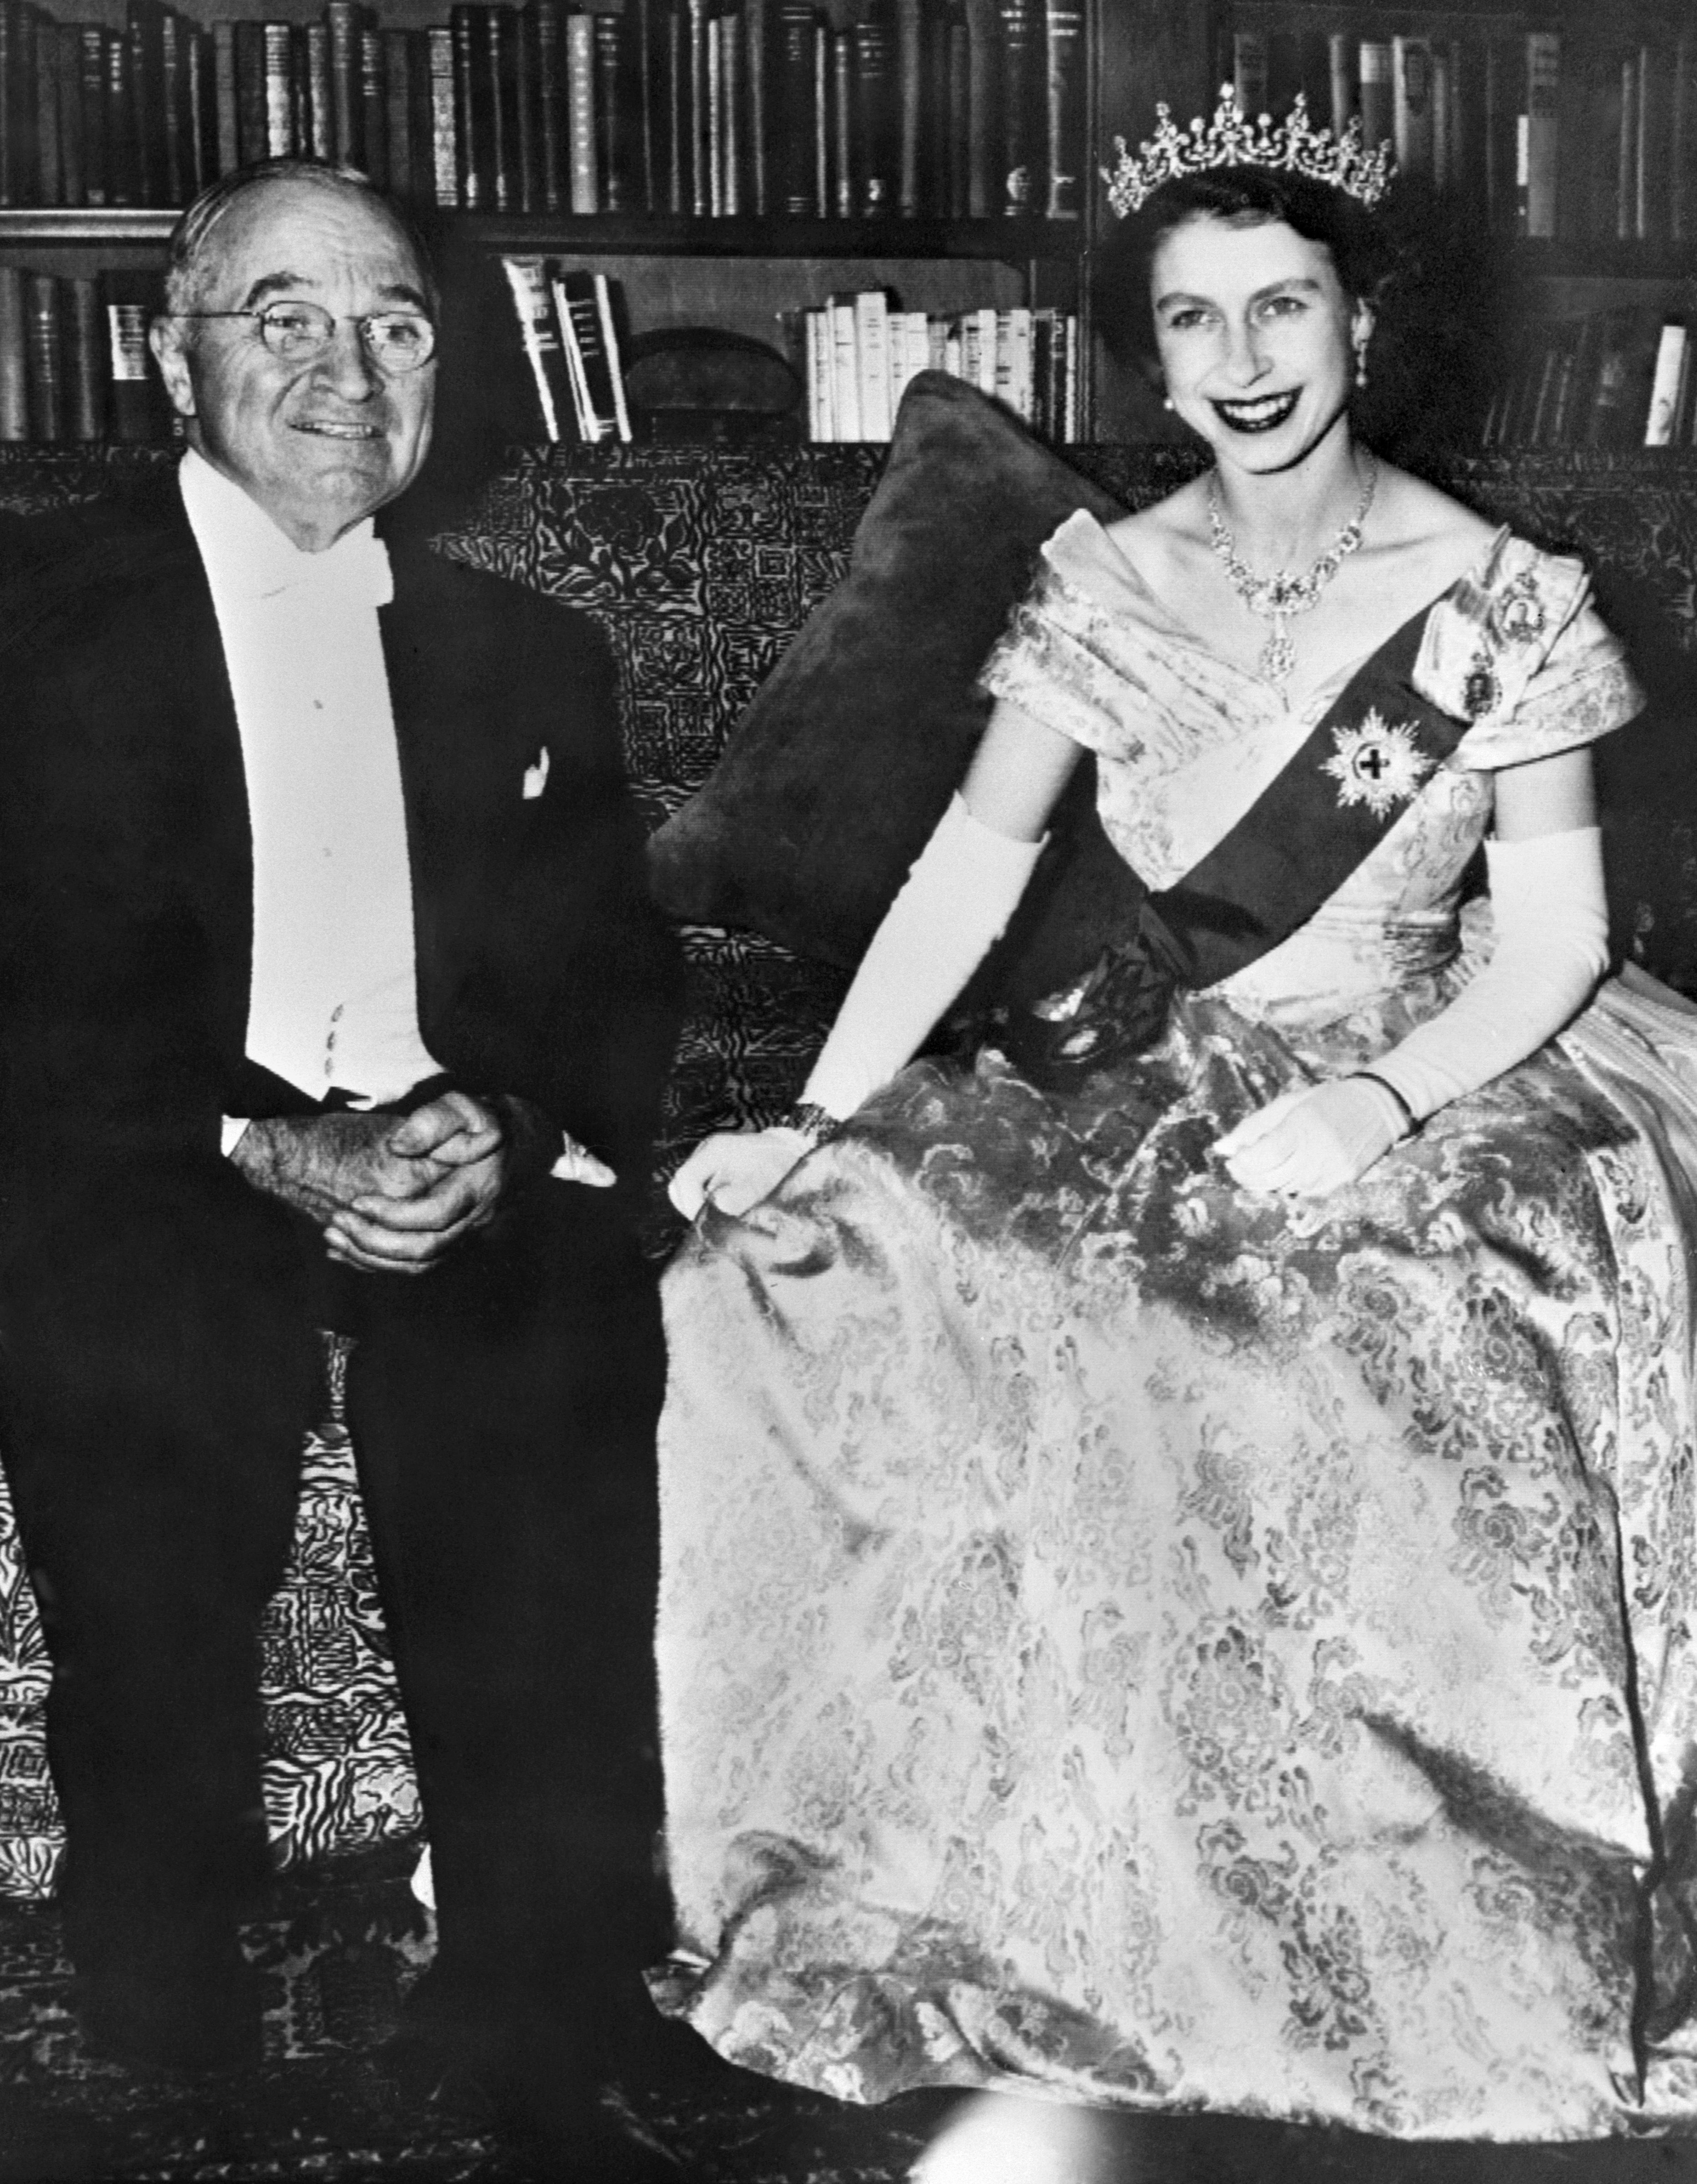 Then-Princess Elizabeth poses for a photo sitting next to American President Harry Truman in 1951